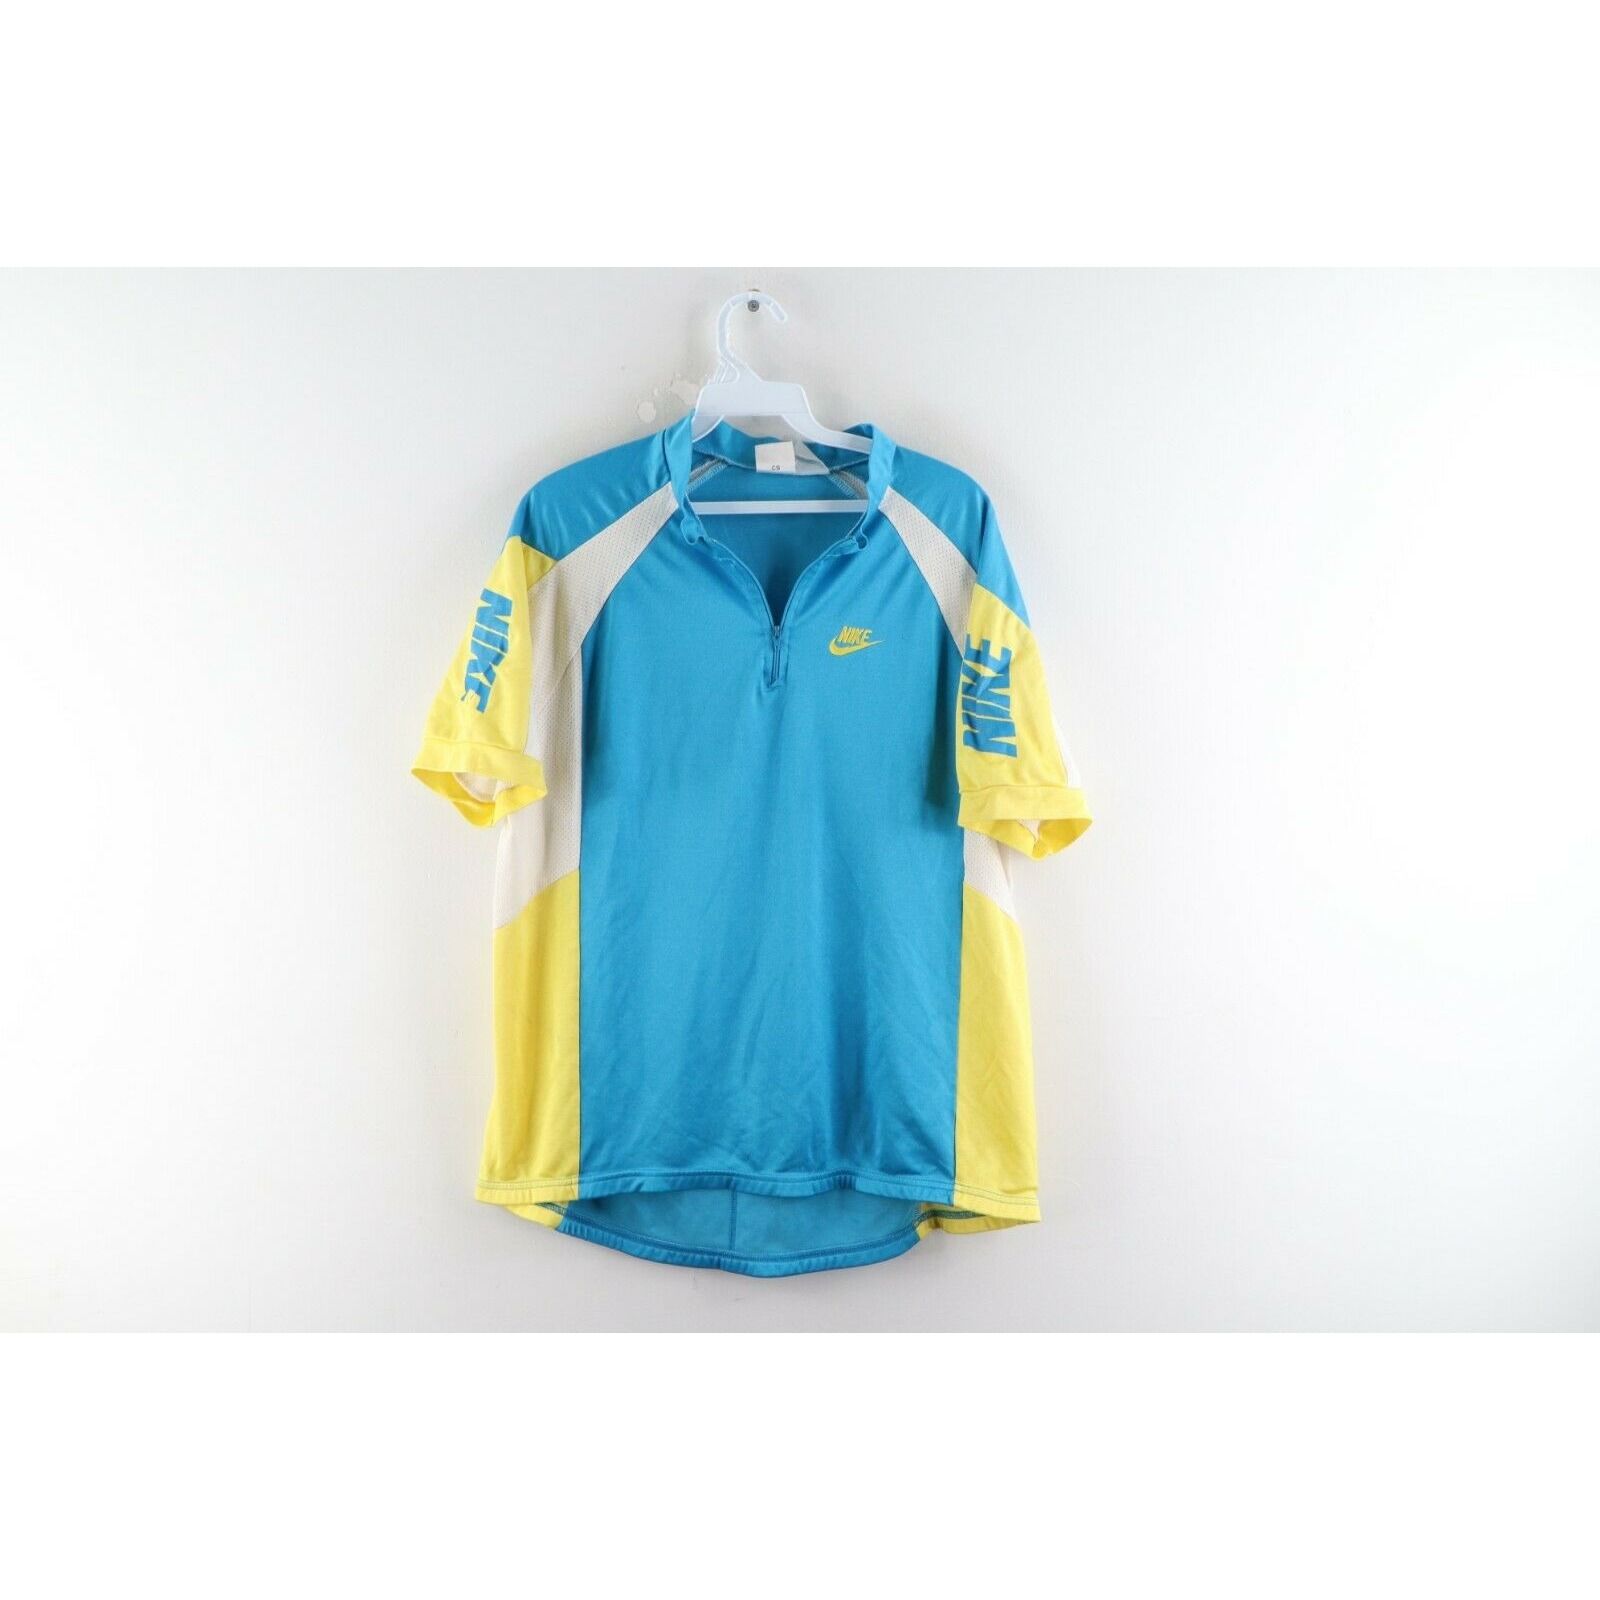 Nike Vintage 90s Nike Color Block Bicycle Cycling Jersey Size US M / EU 48-50 / 2 - 1 Preview